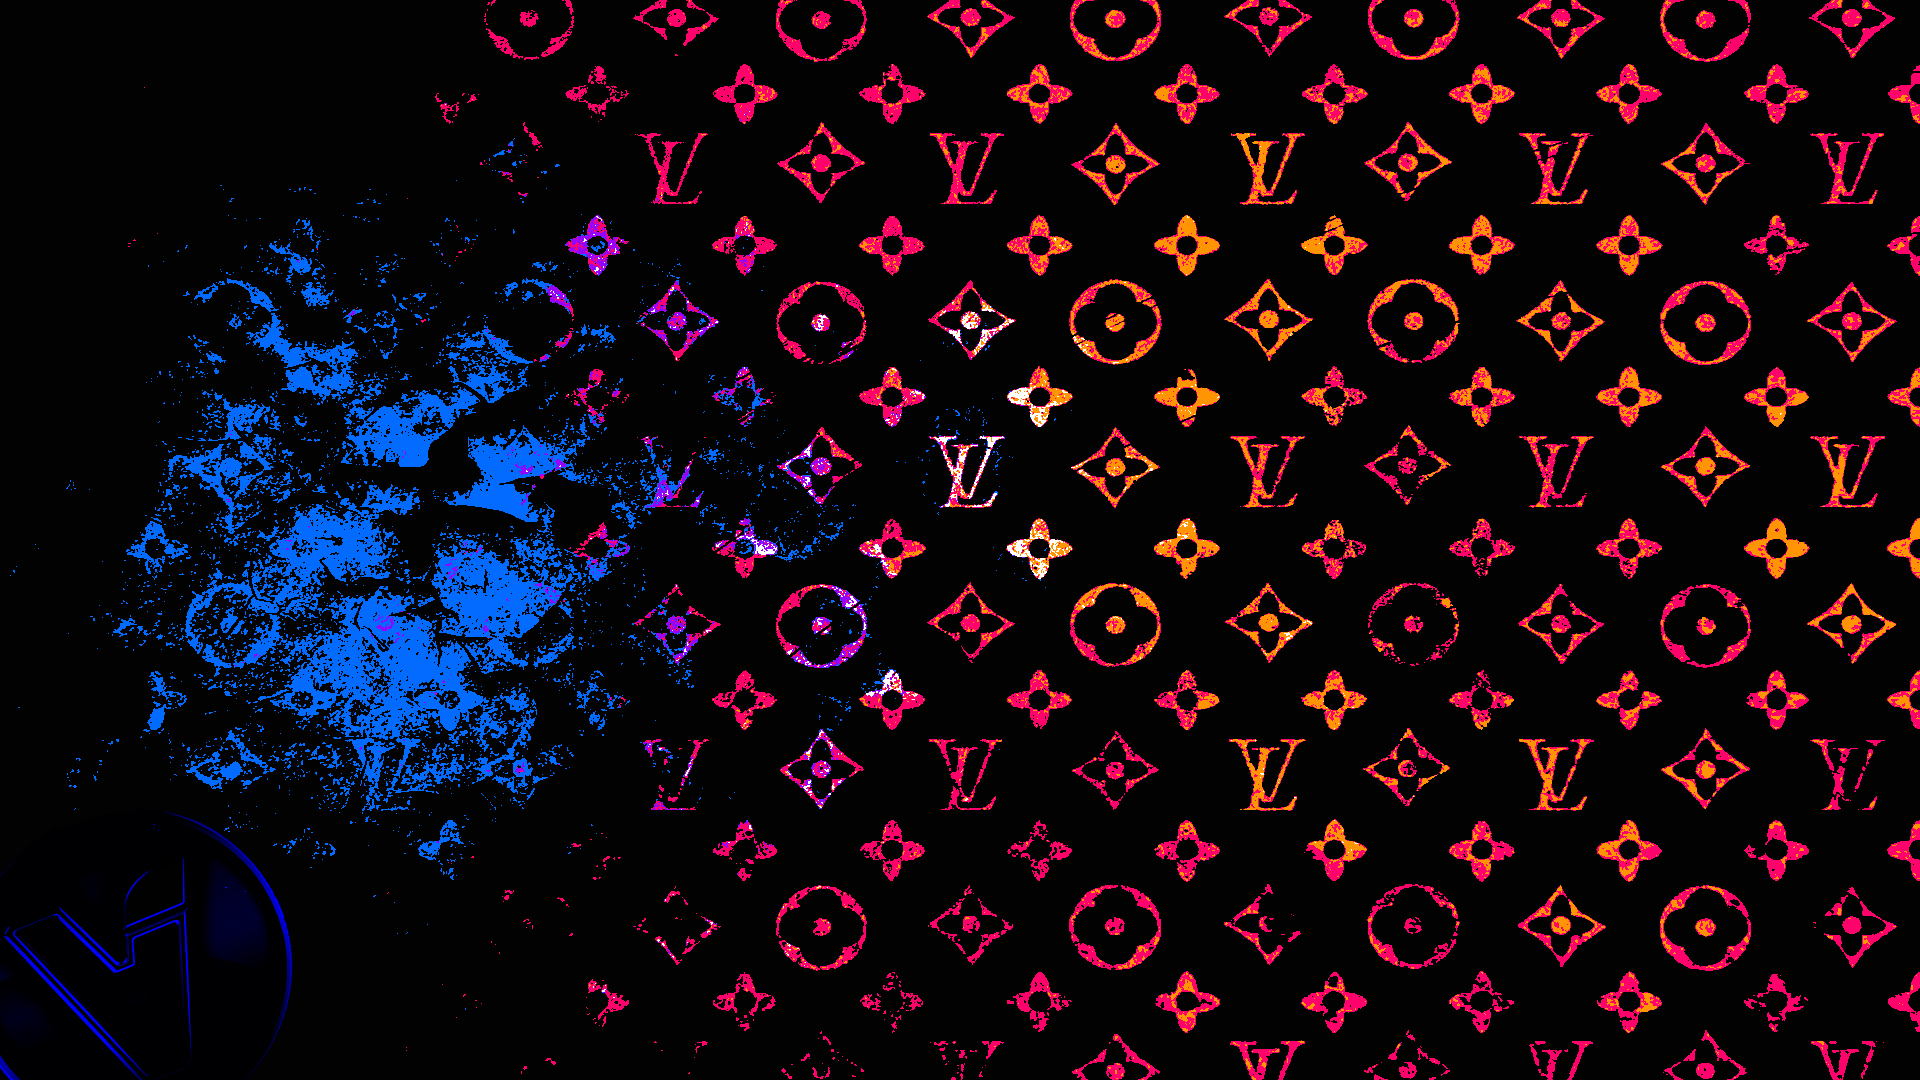 Louis Vuitton wallpaper by jxgaming231 - Download on ZEDGE™